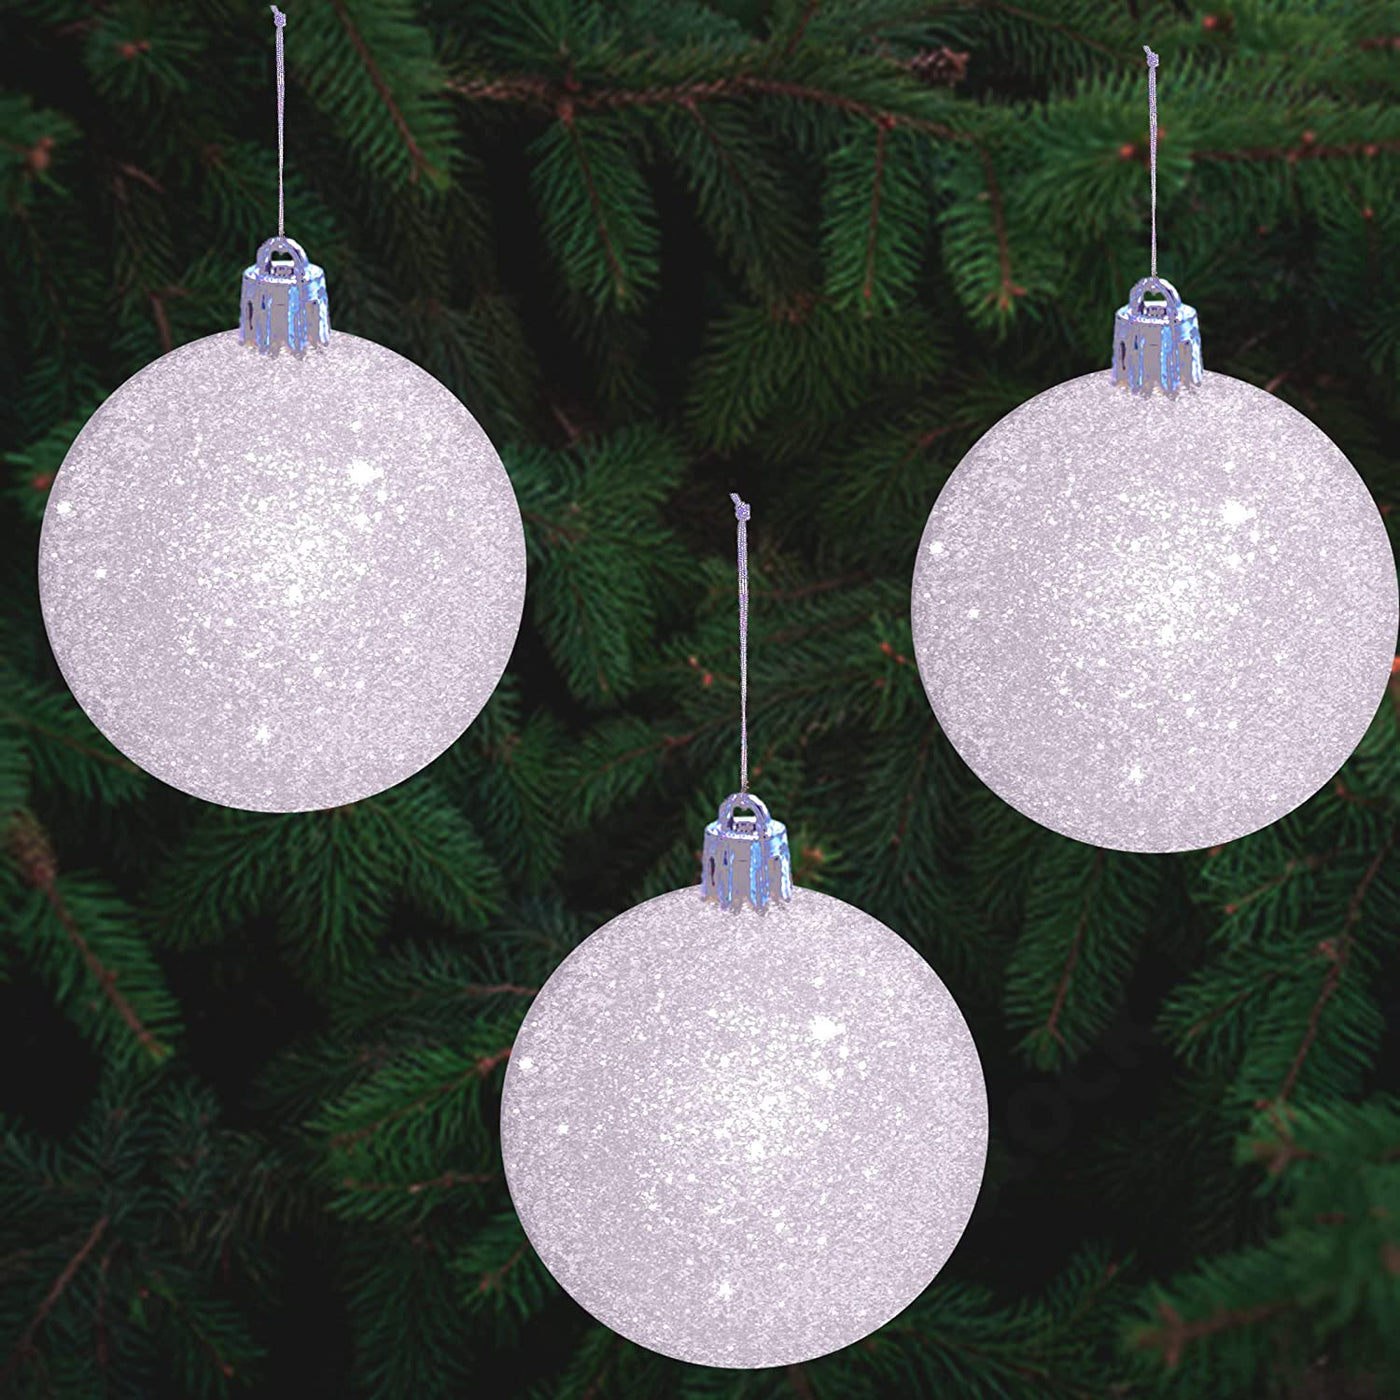 White Snowball Ornament (18 Pack) 2.36 Inch 60mm Glitter Sparkly Snow Ball Christmas Ornament for Christmas Tree Decoration, Iridescent Ornaments Shatterproof Plastic Bulk Set by 4E's Novelty